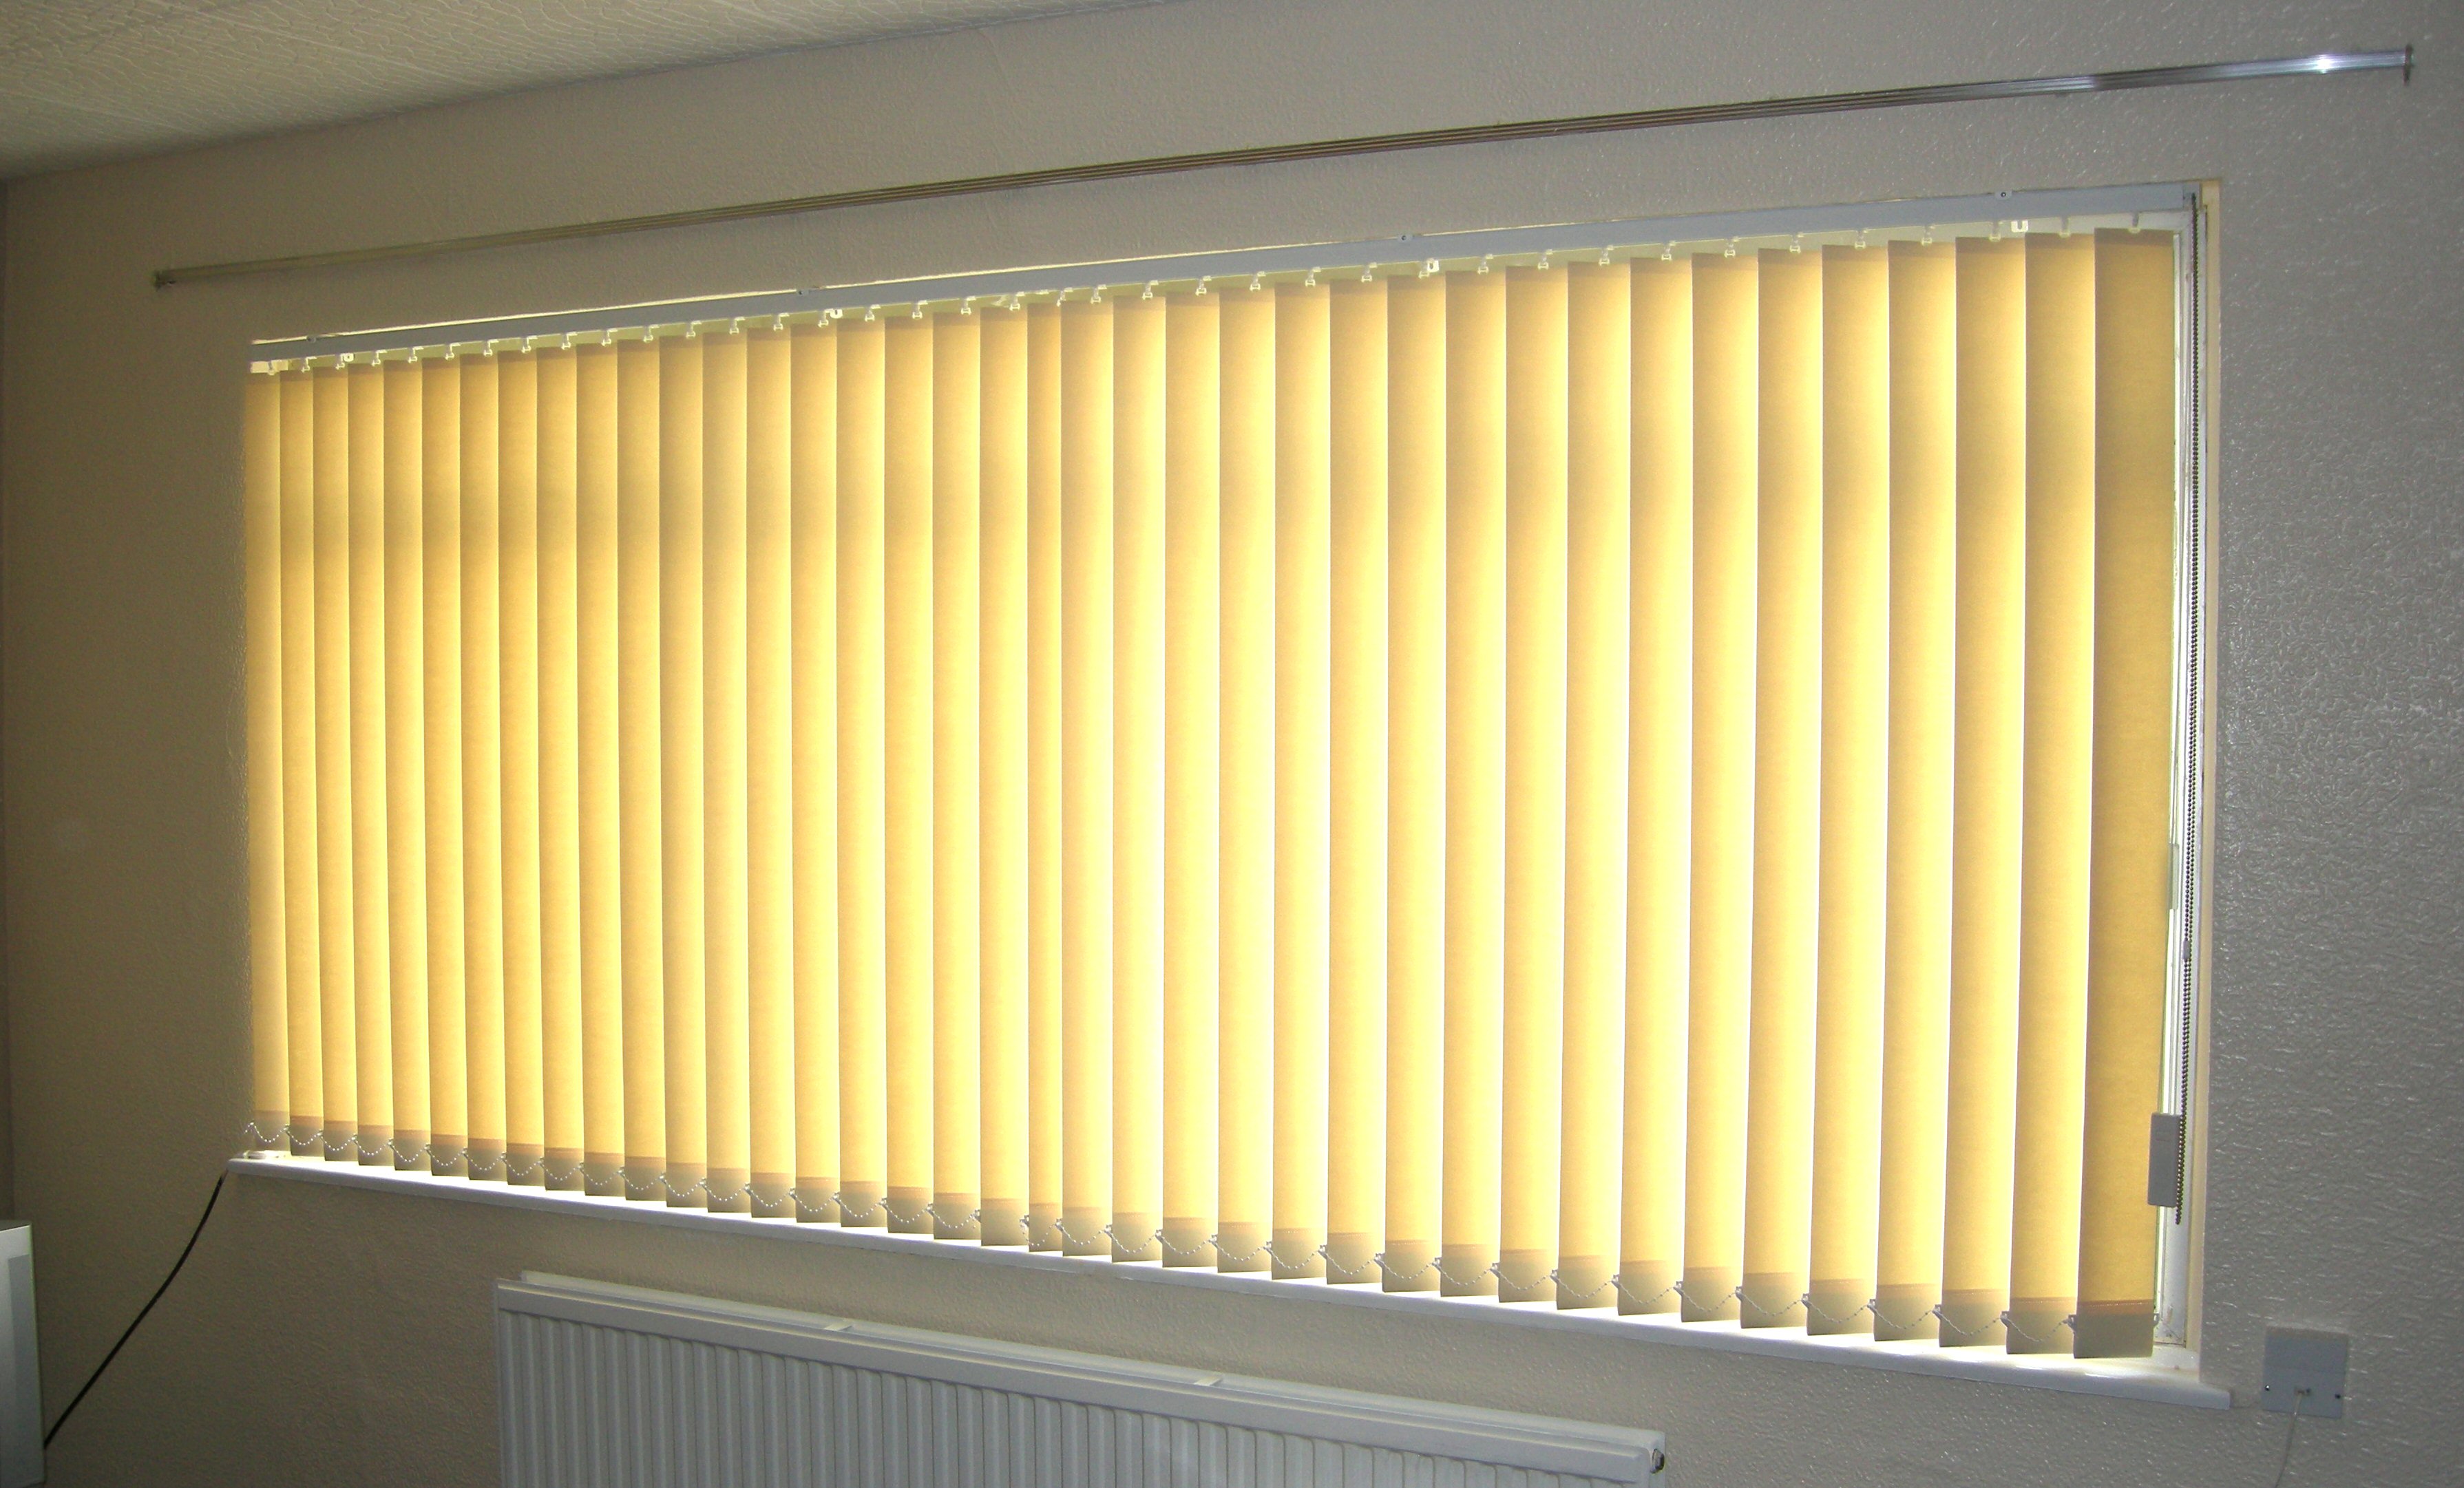 Vertical Blinds and Window Blinds Are the Solution When Complications Are Ample